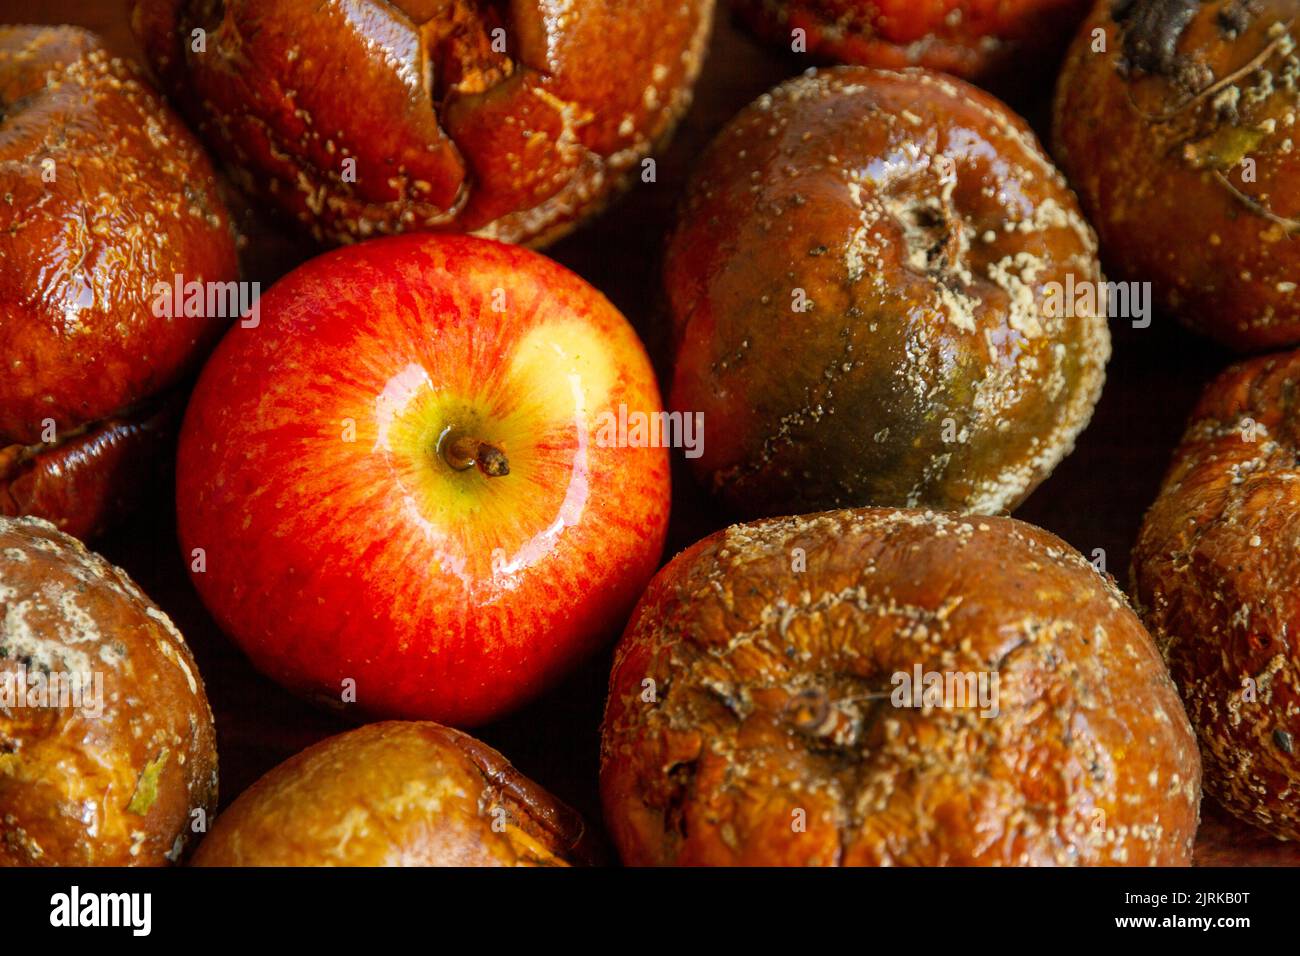 One good apple nestling in between a load of bad apples, viewed from above, implying the bad apples have taken over, or can the good apple fight back? Stock Photo